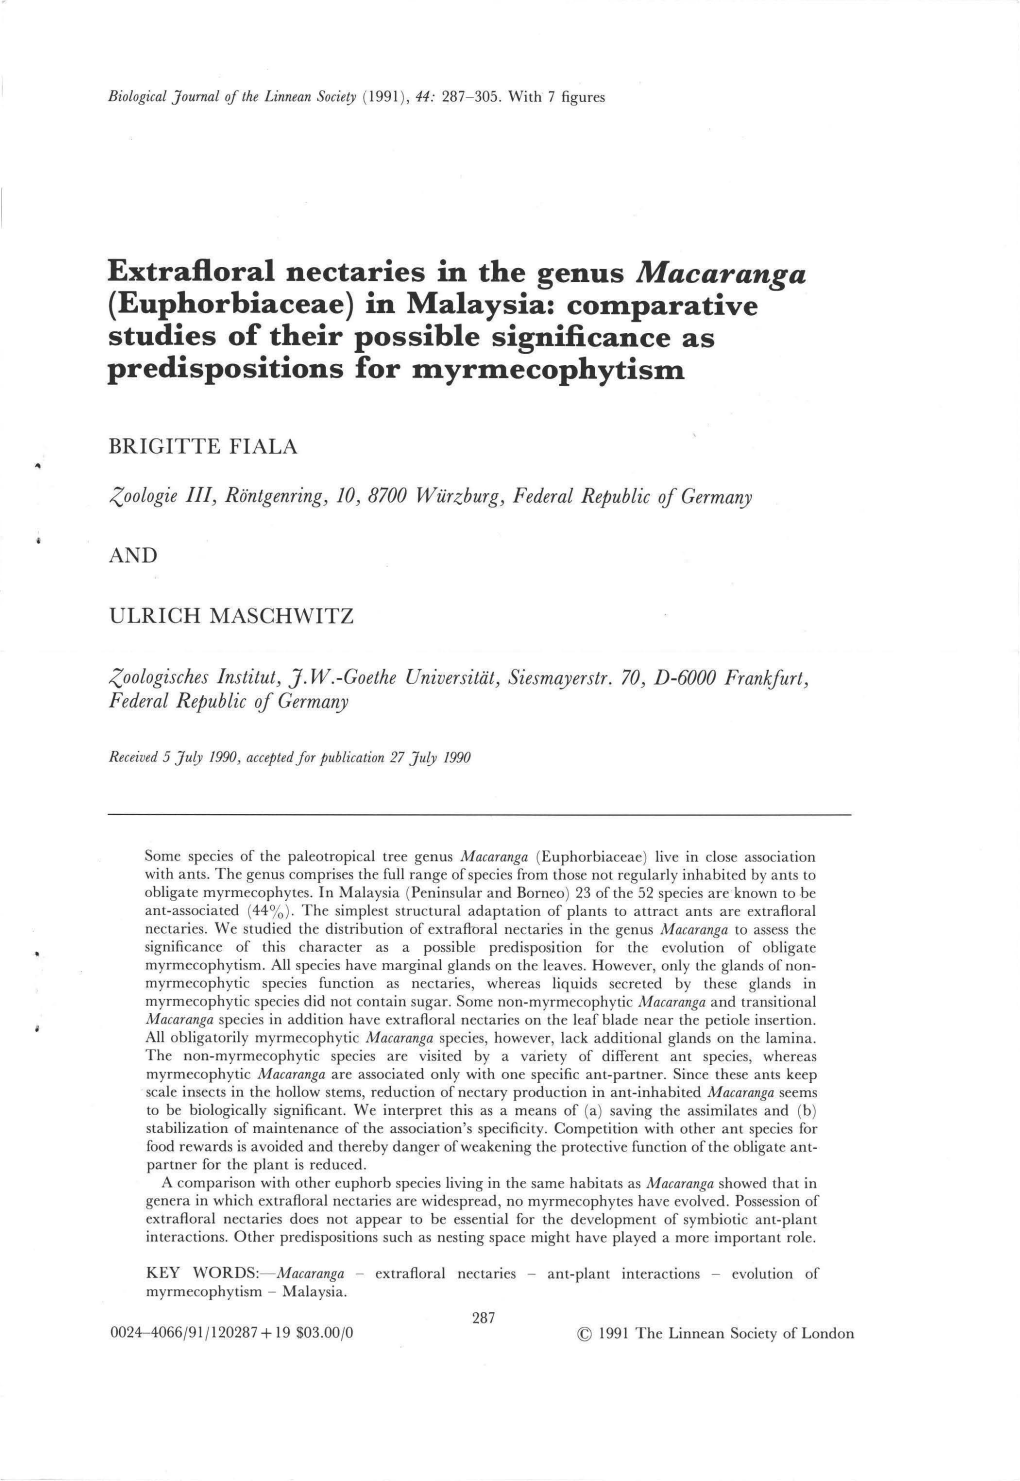 Extrafloral Nectaries in the Genus Macaranga (Euphorbiaceae) in Malaysia: Colllparative Studies of Their Possible Significance A